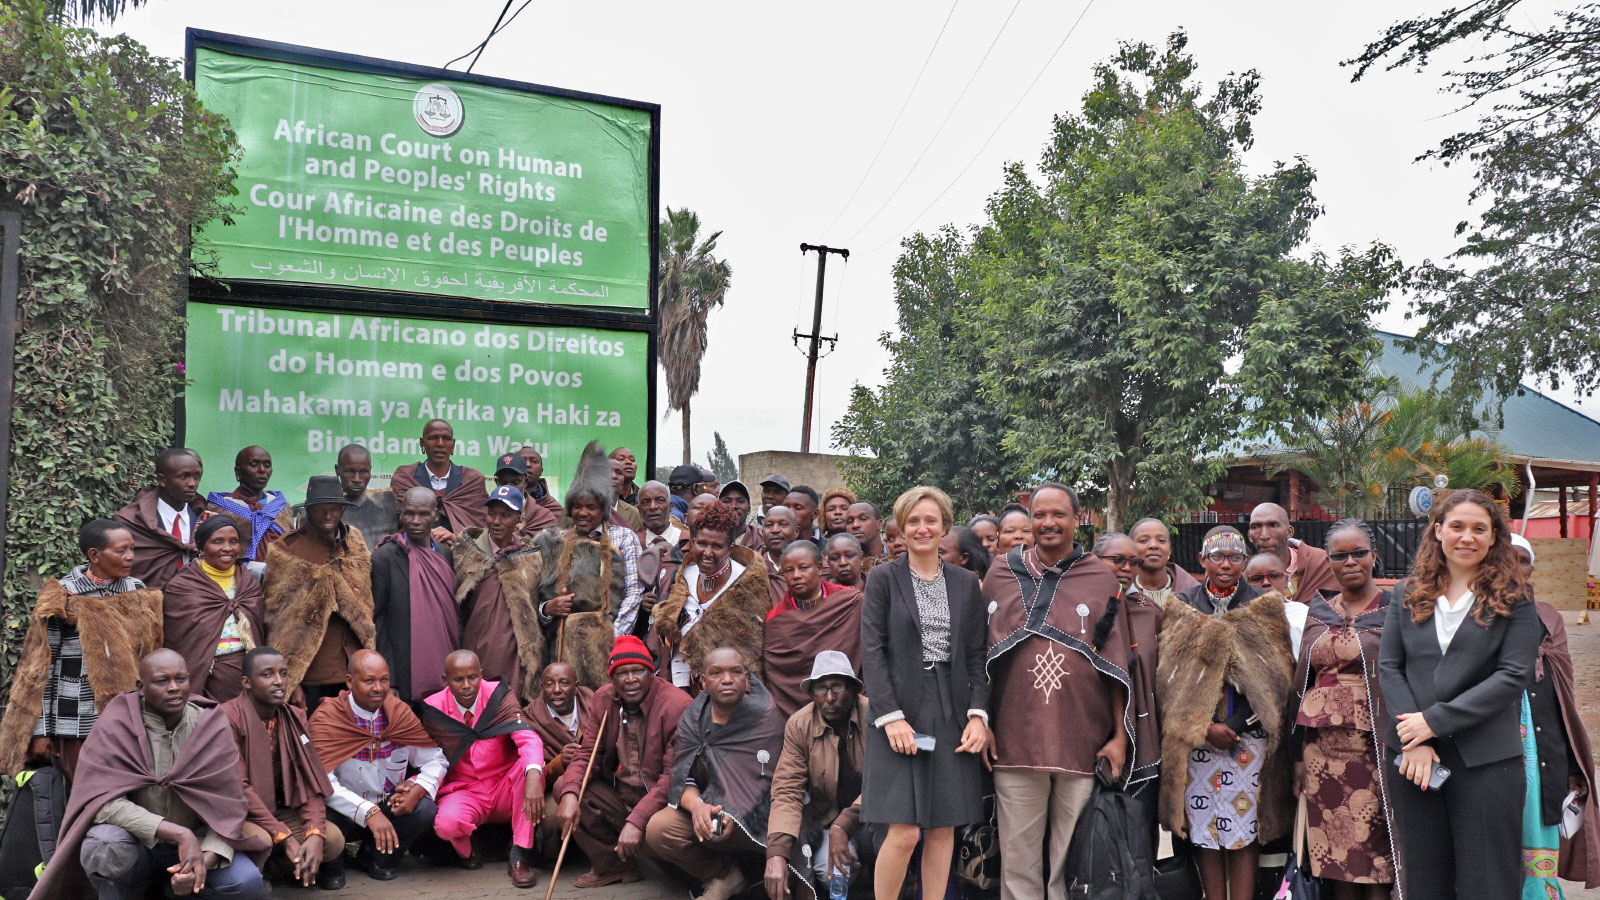 A group of Ogiek people, an indigenous tribe native to Tanzania and Southern Kenya, posing in front of a green sign for the African Court on Human and Peoples' Rights